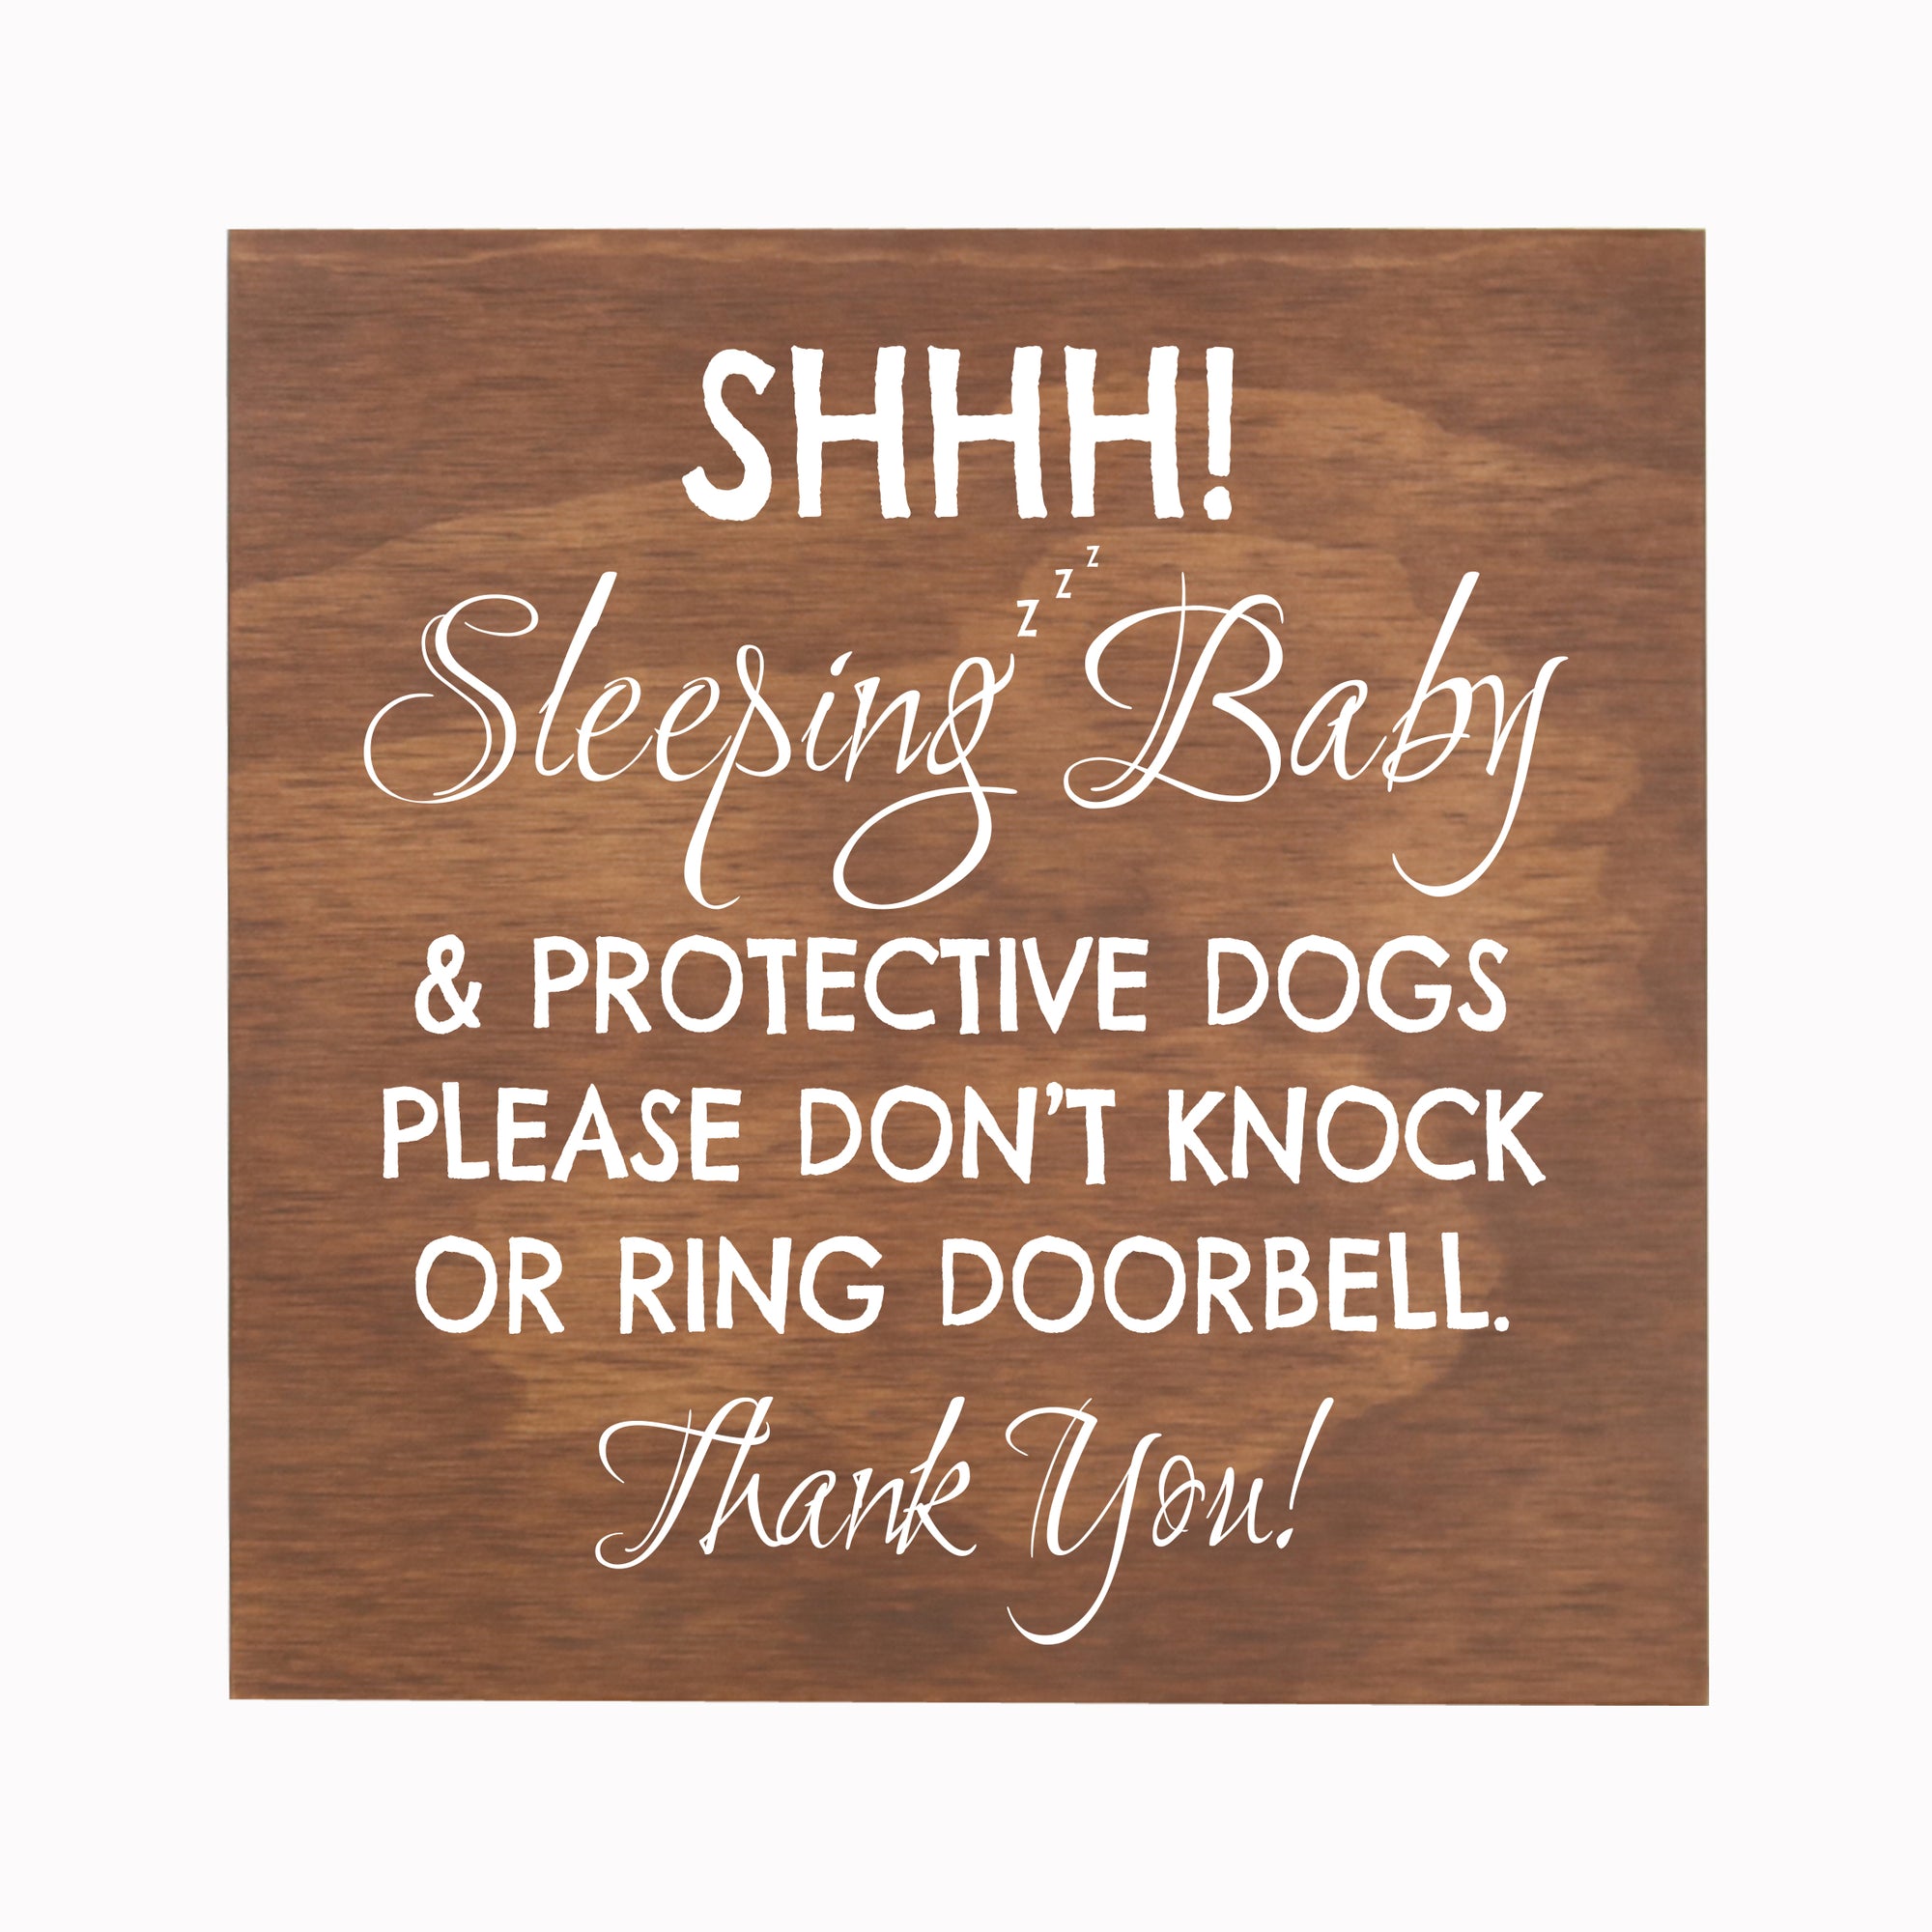 LifeSong Milestones Sleeping Baby Protective Puppies Baltic Birch Hanging Sign for Front Door - Do Not Knock or Ring Doorbell - Quiet Entry for House New Home Decor - 10x10